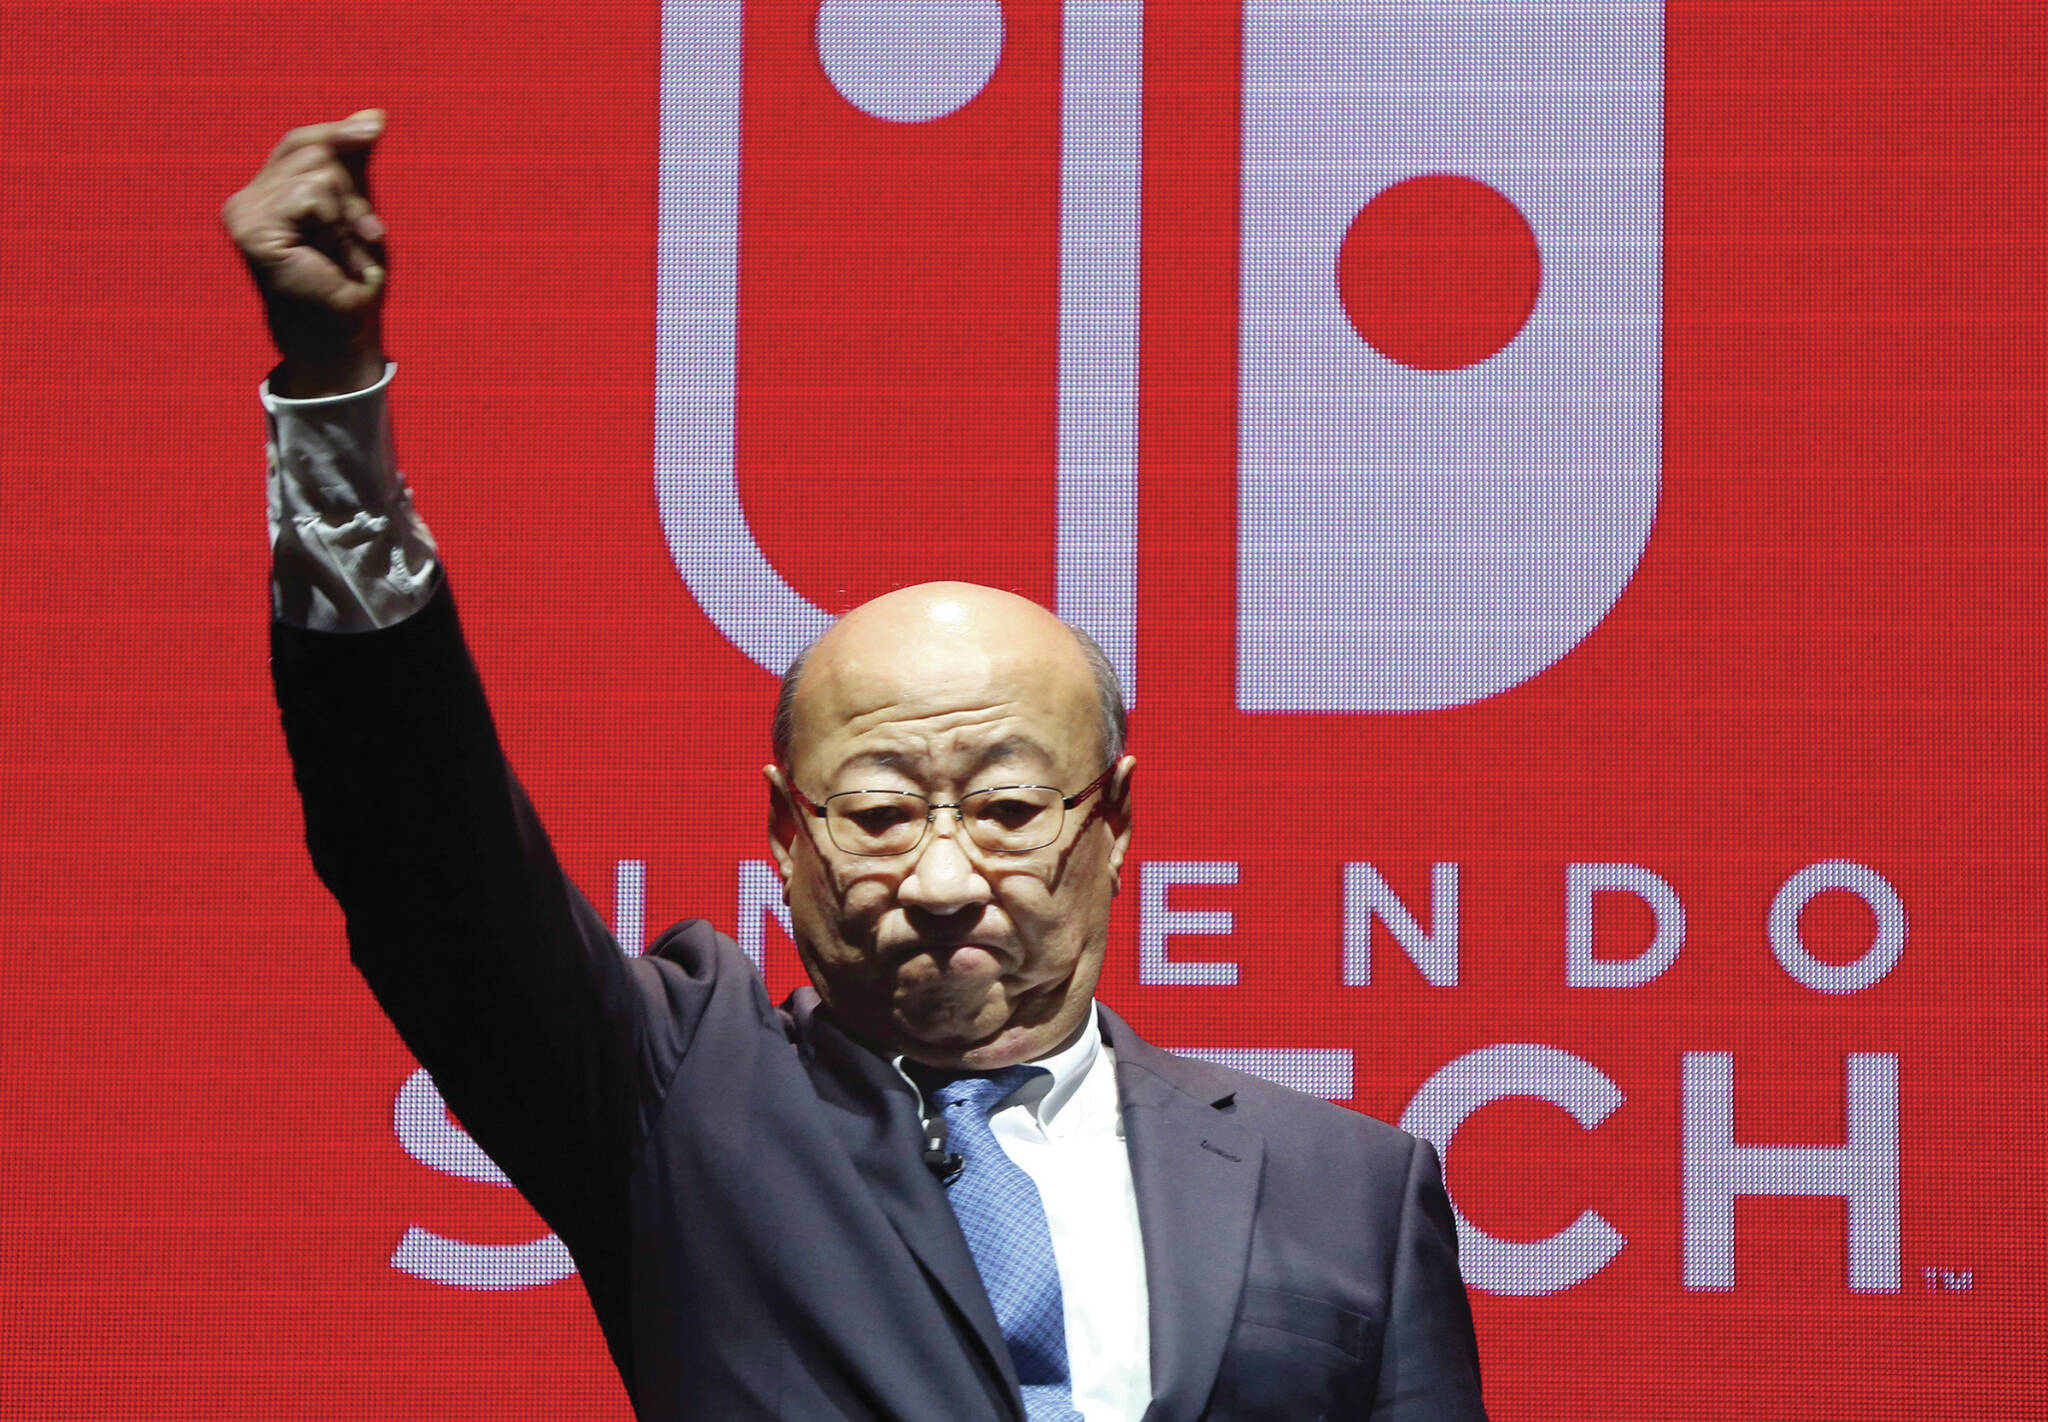 President of Nintendo Tatsumi Kimishima reacts after his speech during a presentation event of Nintendo Switch in Tokyo, Friday, Jan. 13, 2017. Nintendo Co. said Friday that its Nintendo Switch video game console will sell for 29,980 yen (about $260) in Japan, starting March 3. (AP Photo/Koji Sasahara)